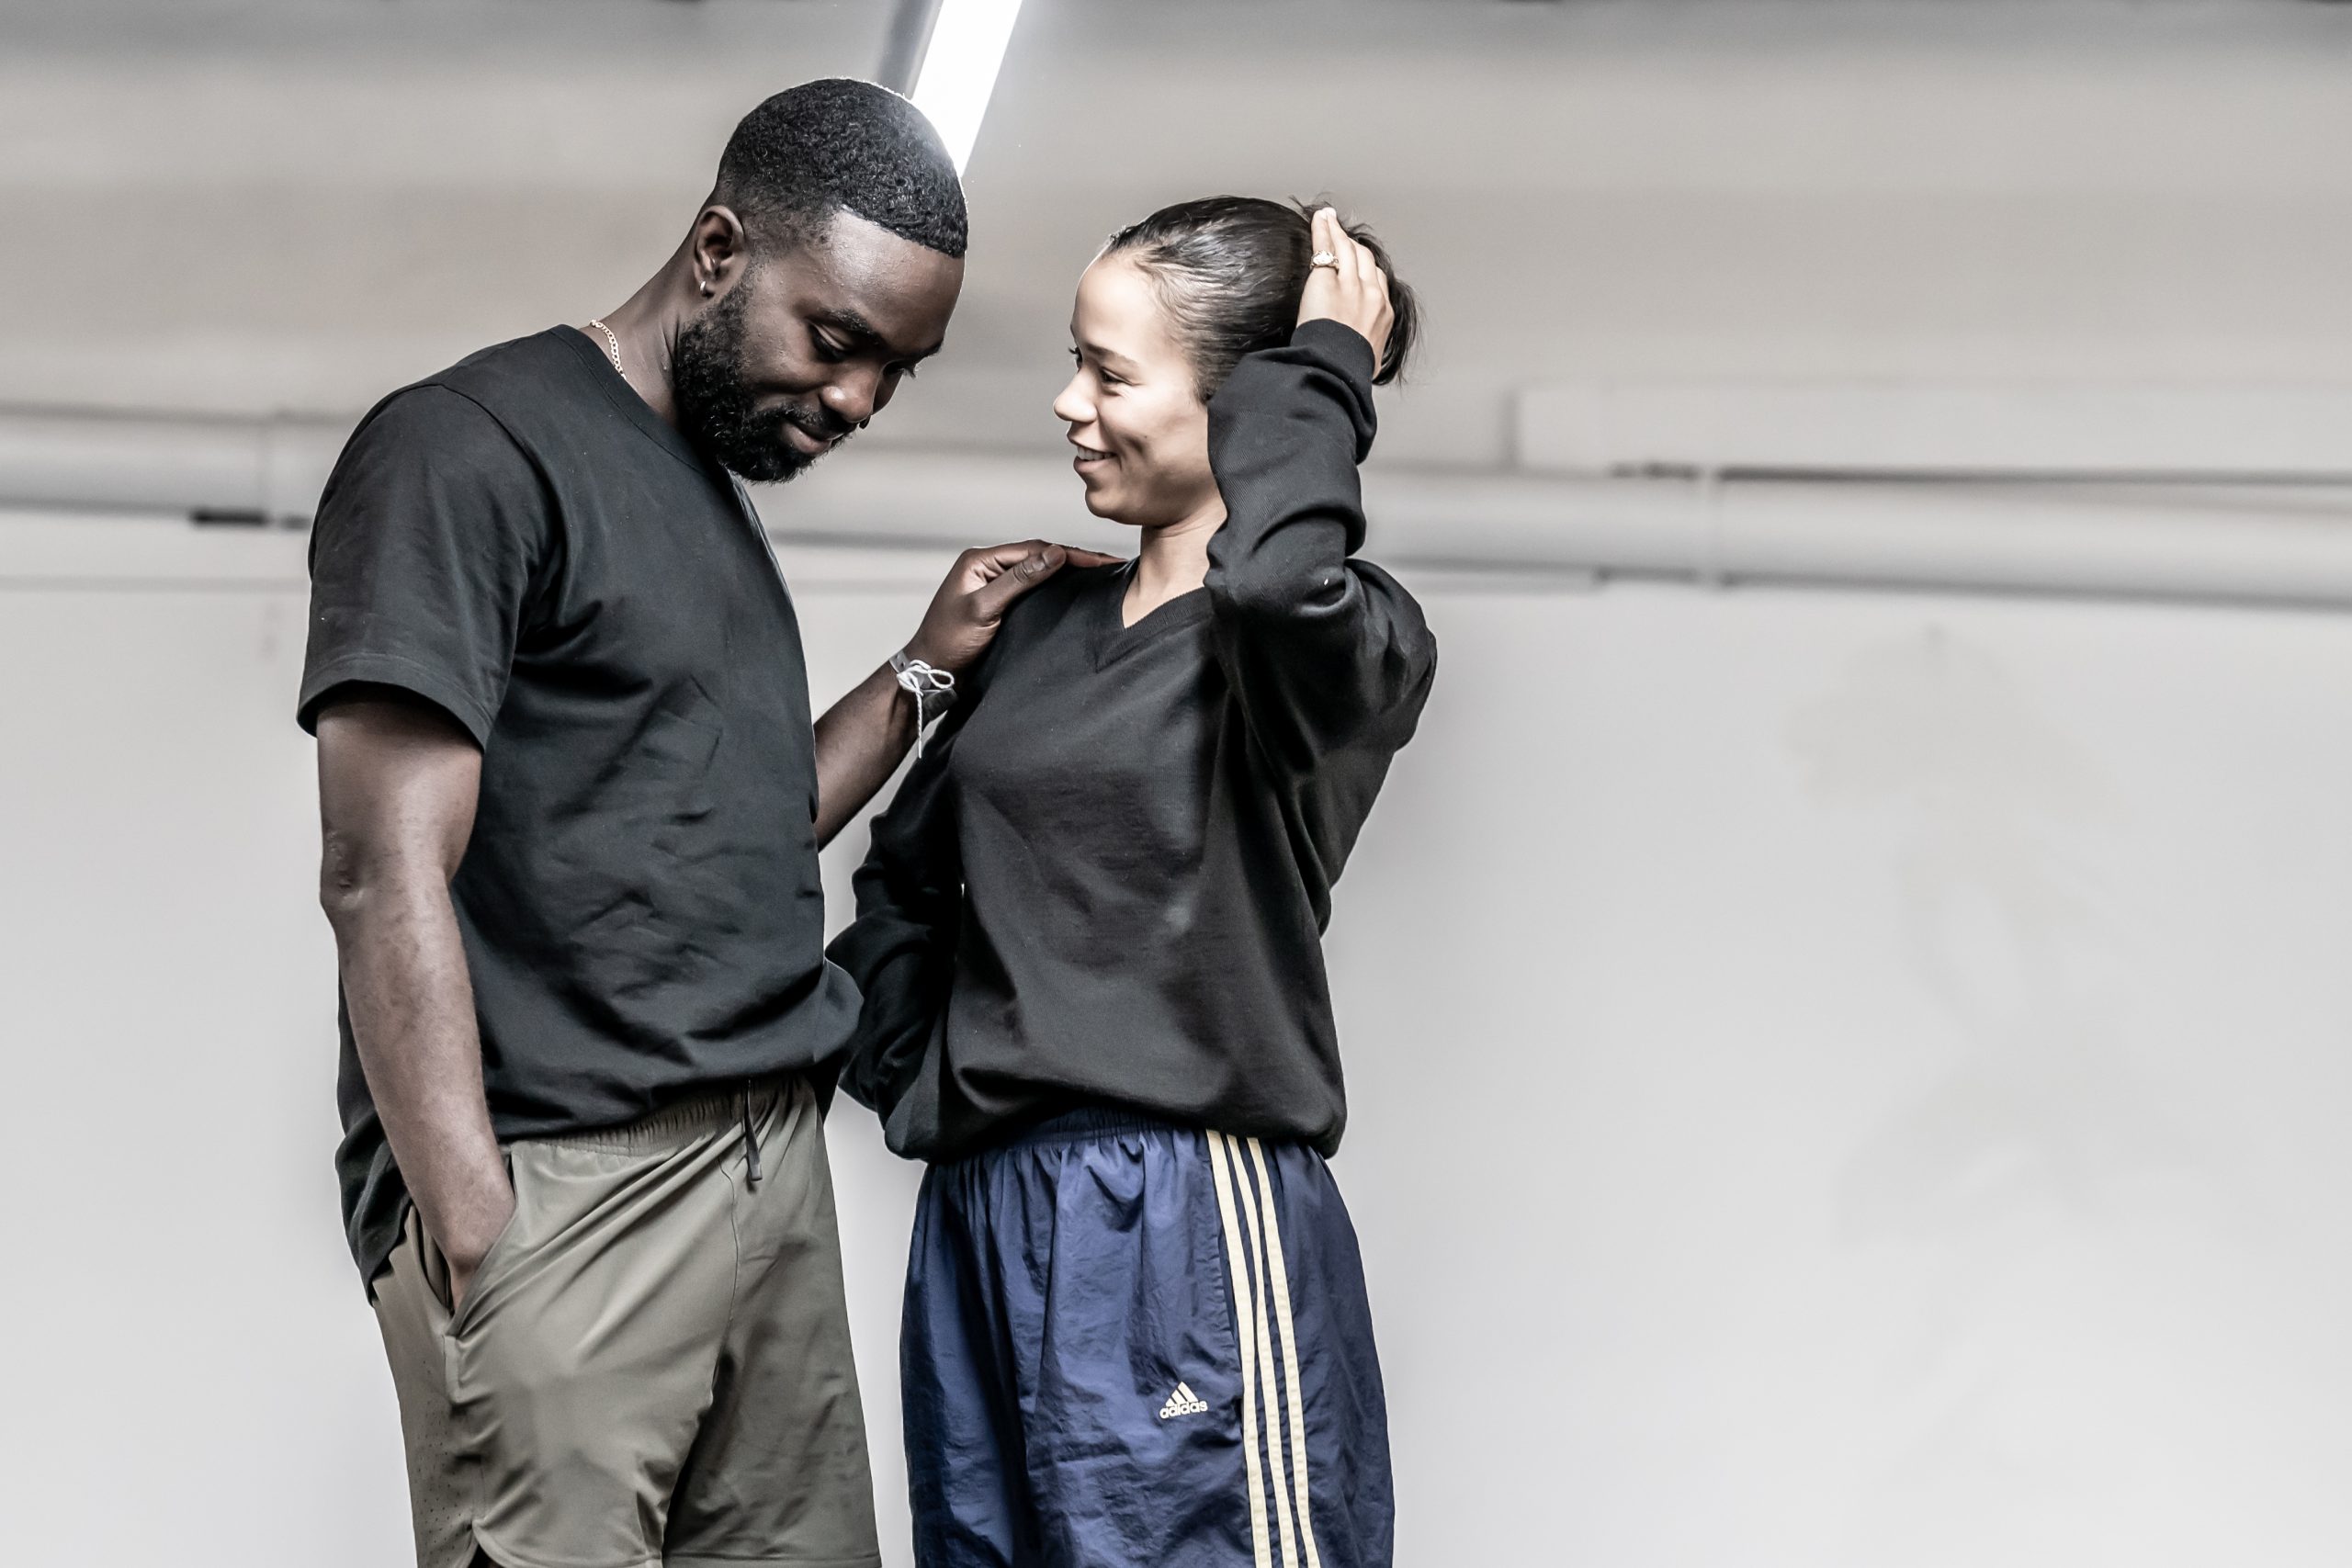 Paapa Essiedu (Tristan) and Taylor Russell (Connie) in rehearsal for The Effect at National Theatre. Image credit Marc Brenner